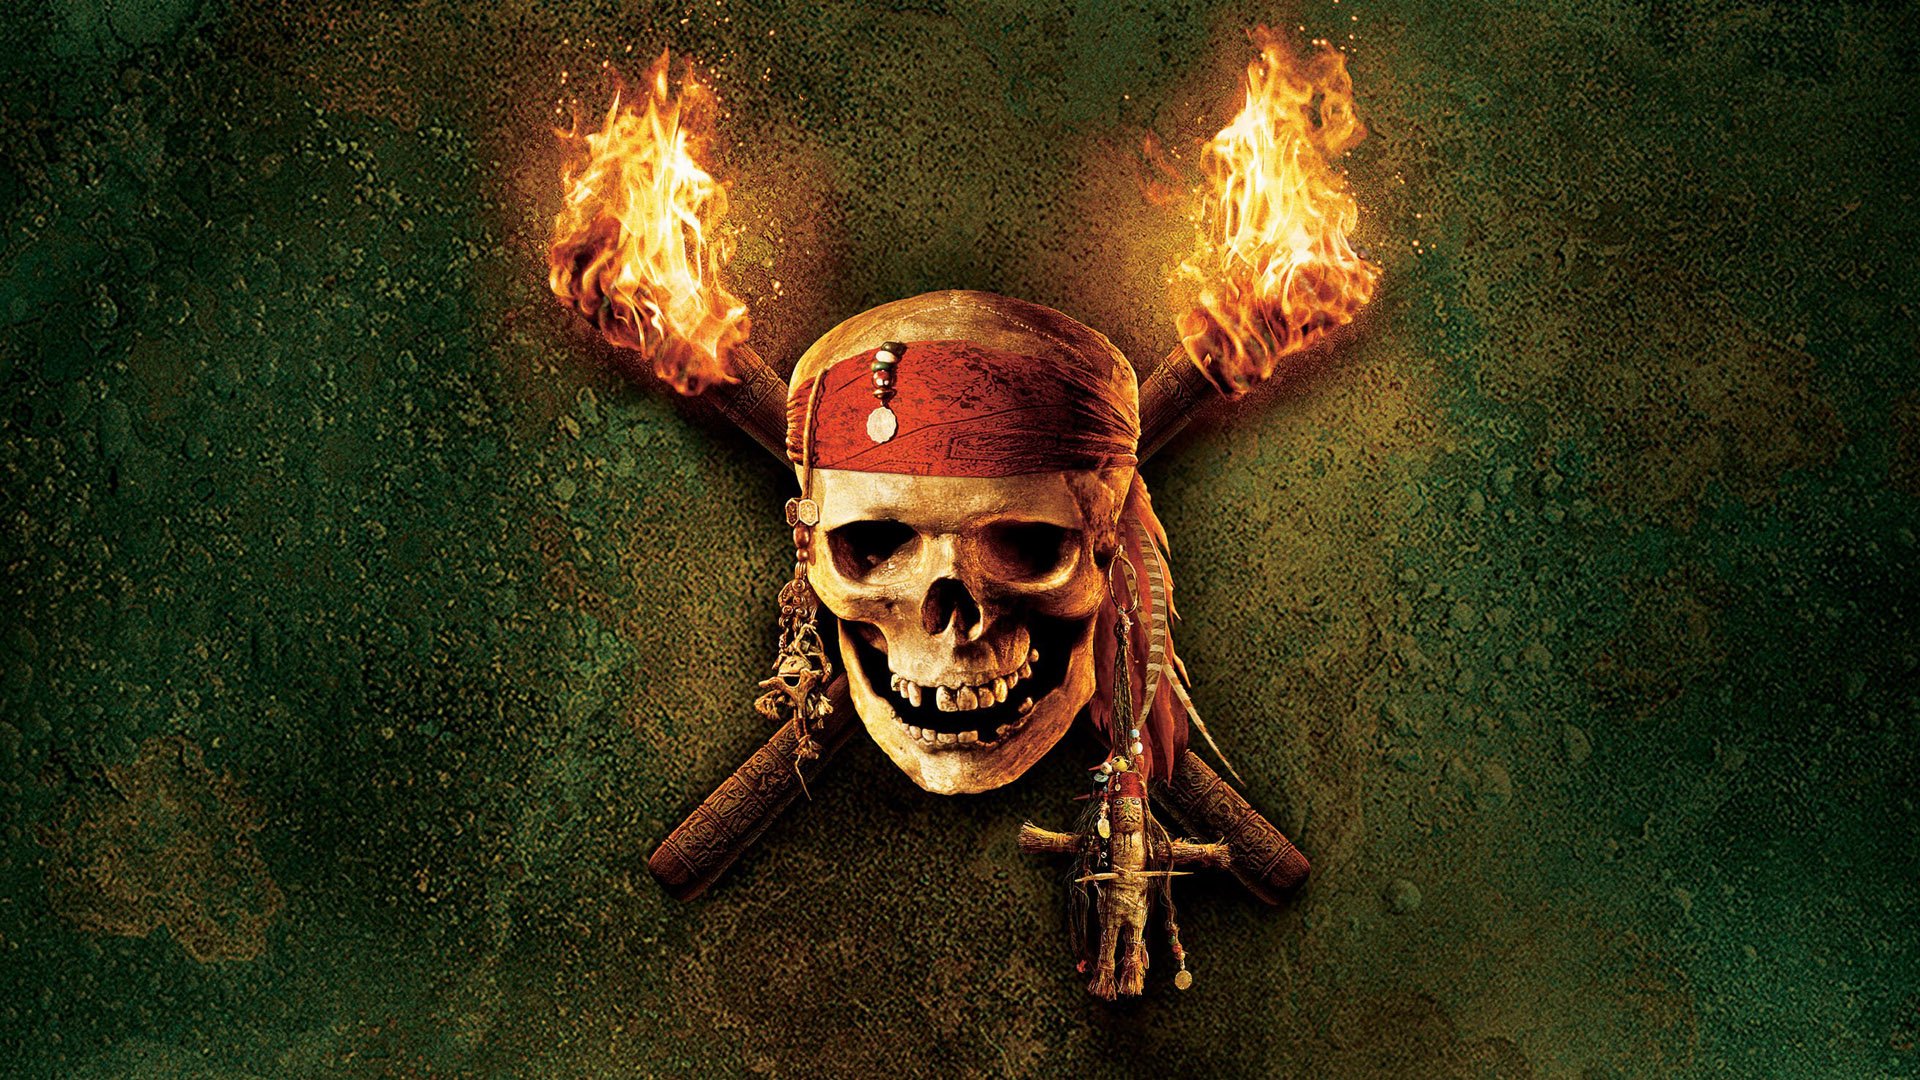 Jack Sparrow, Pirates, Skull, Pirates of the Caribbean, Fire, Head band Wallpaper